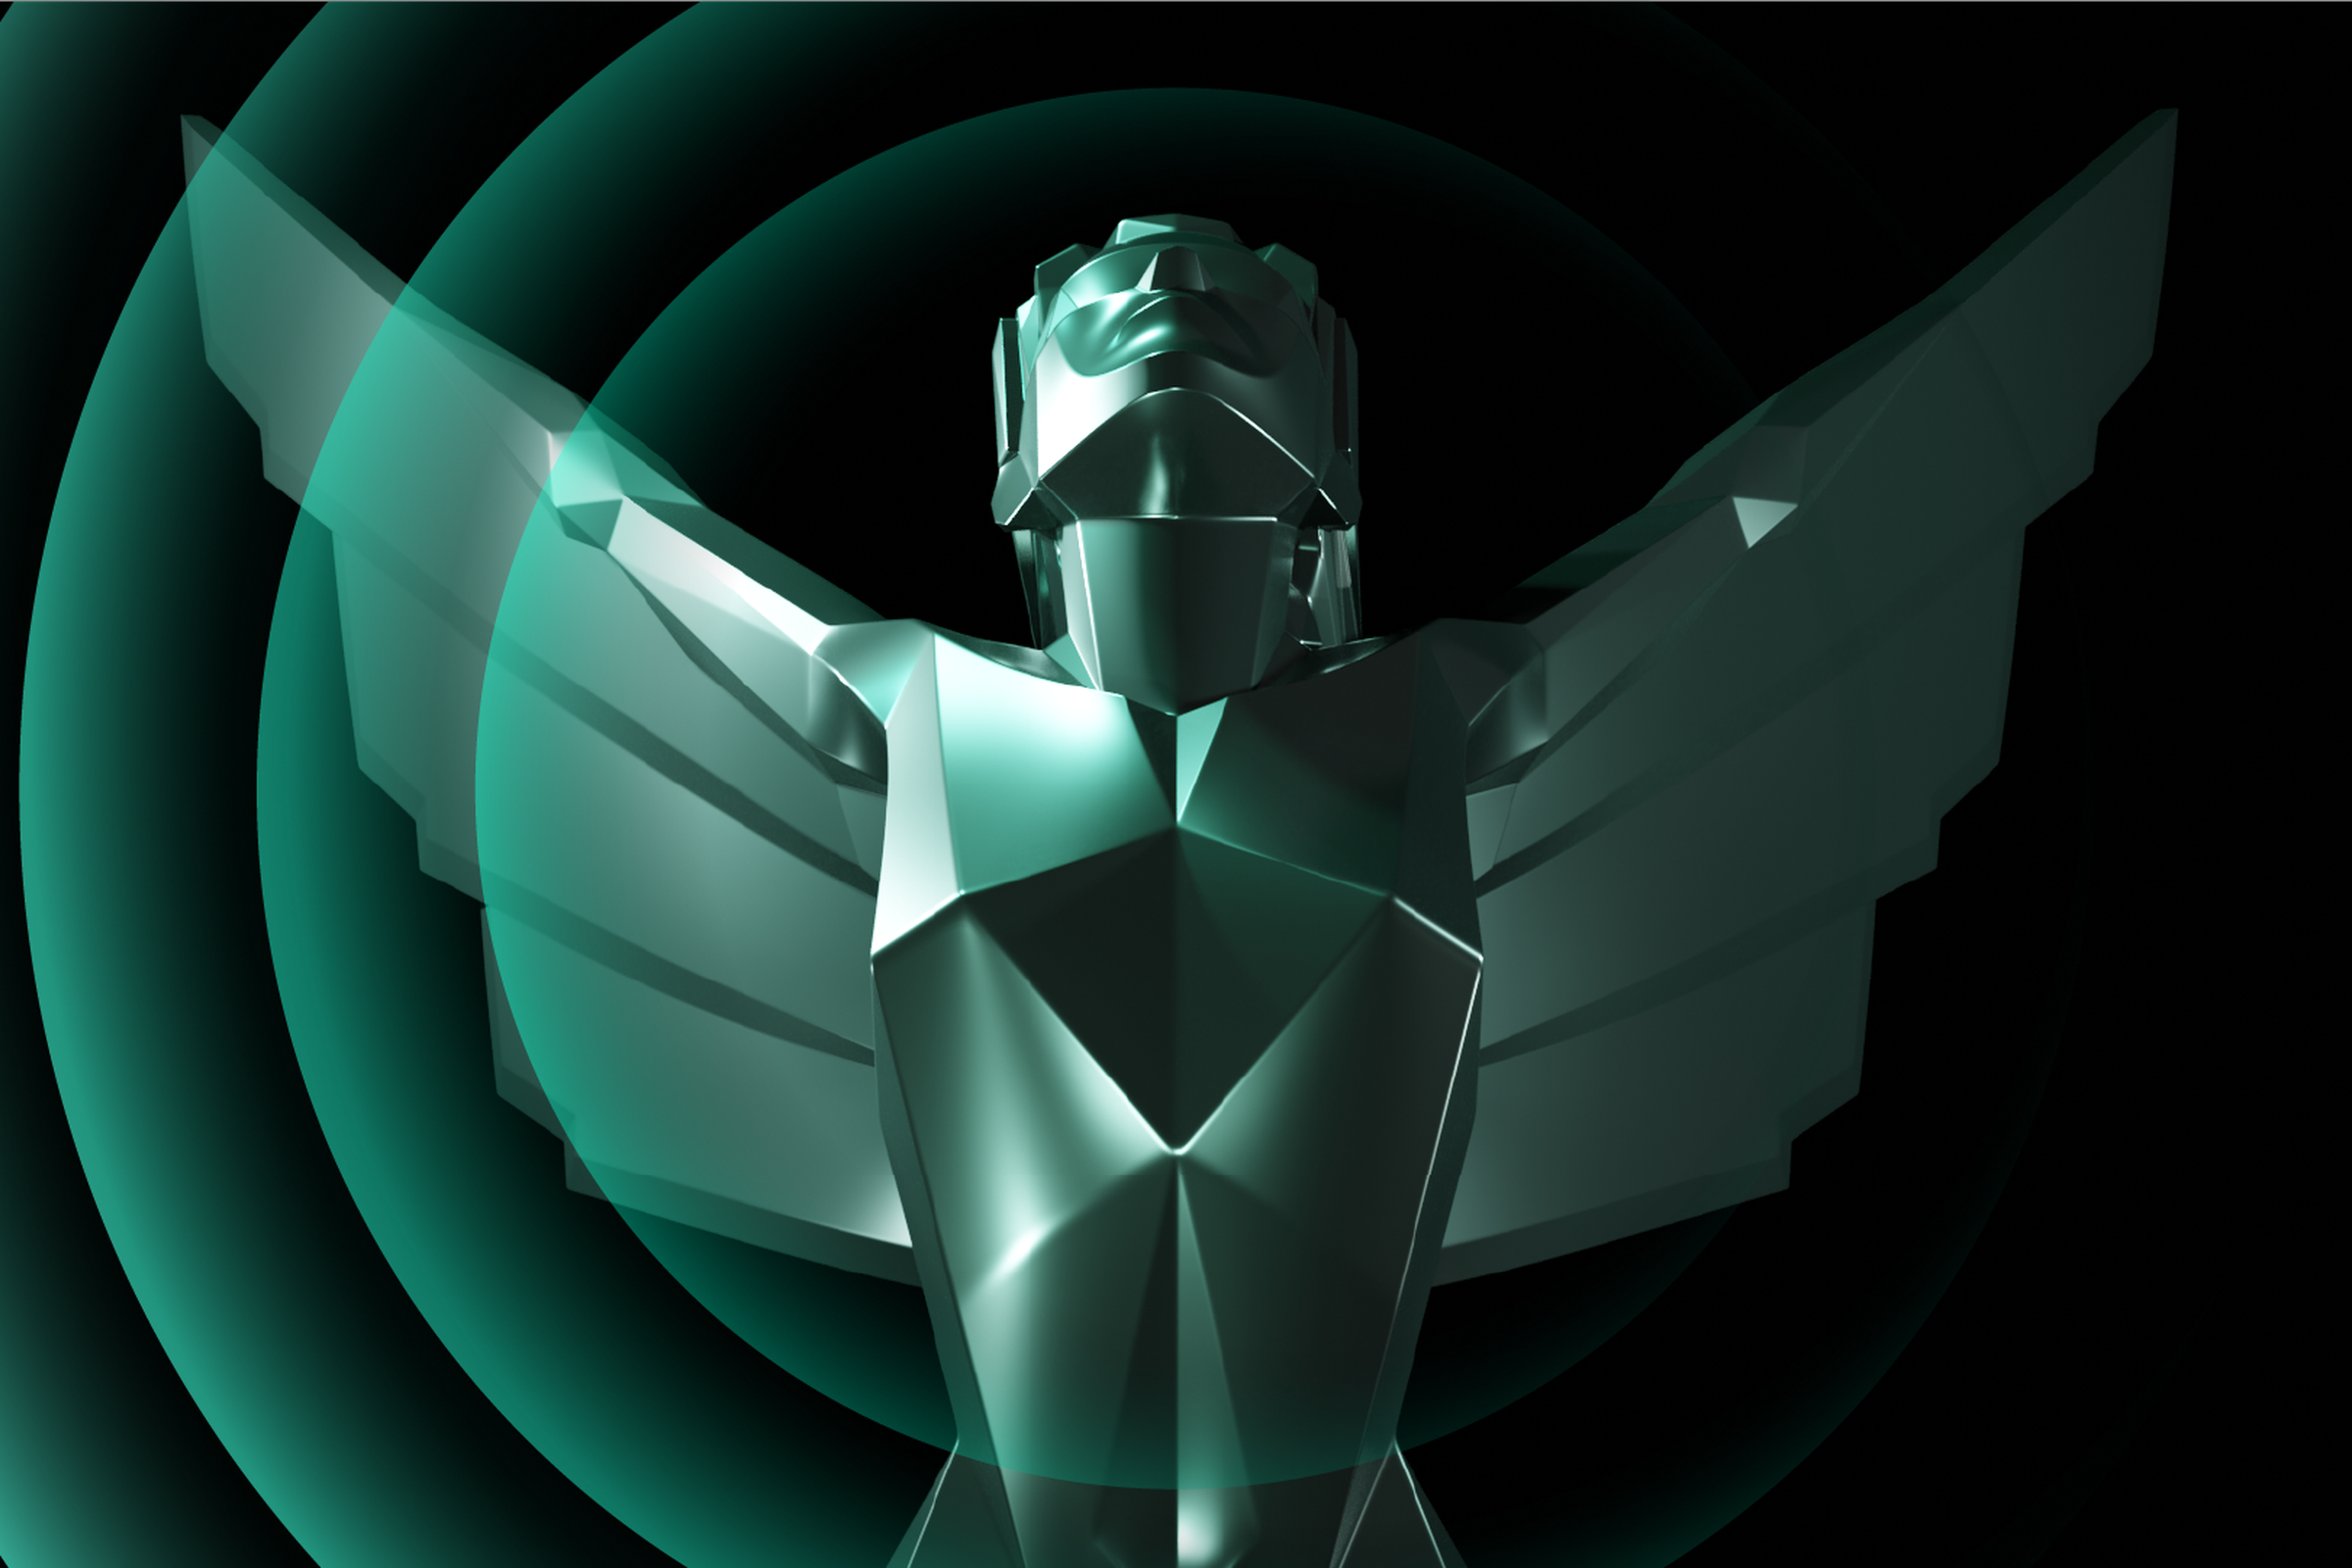 Key art from The Game Awards 10-year concert featuring a close-up of the Game Awards statue highlighted in a greenish-blue color